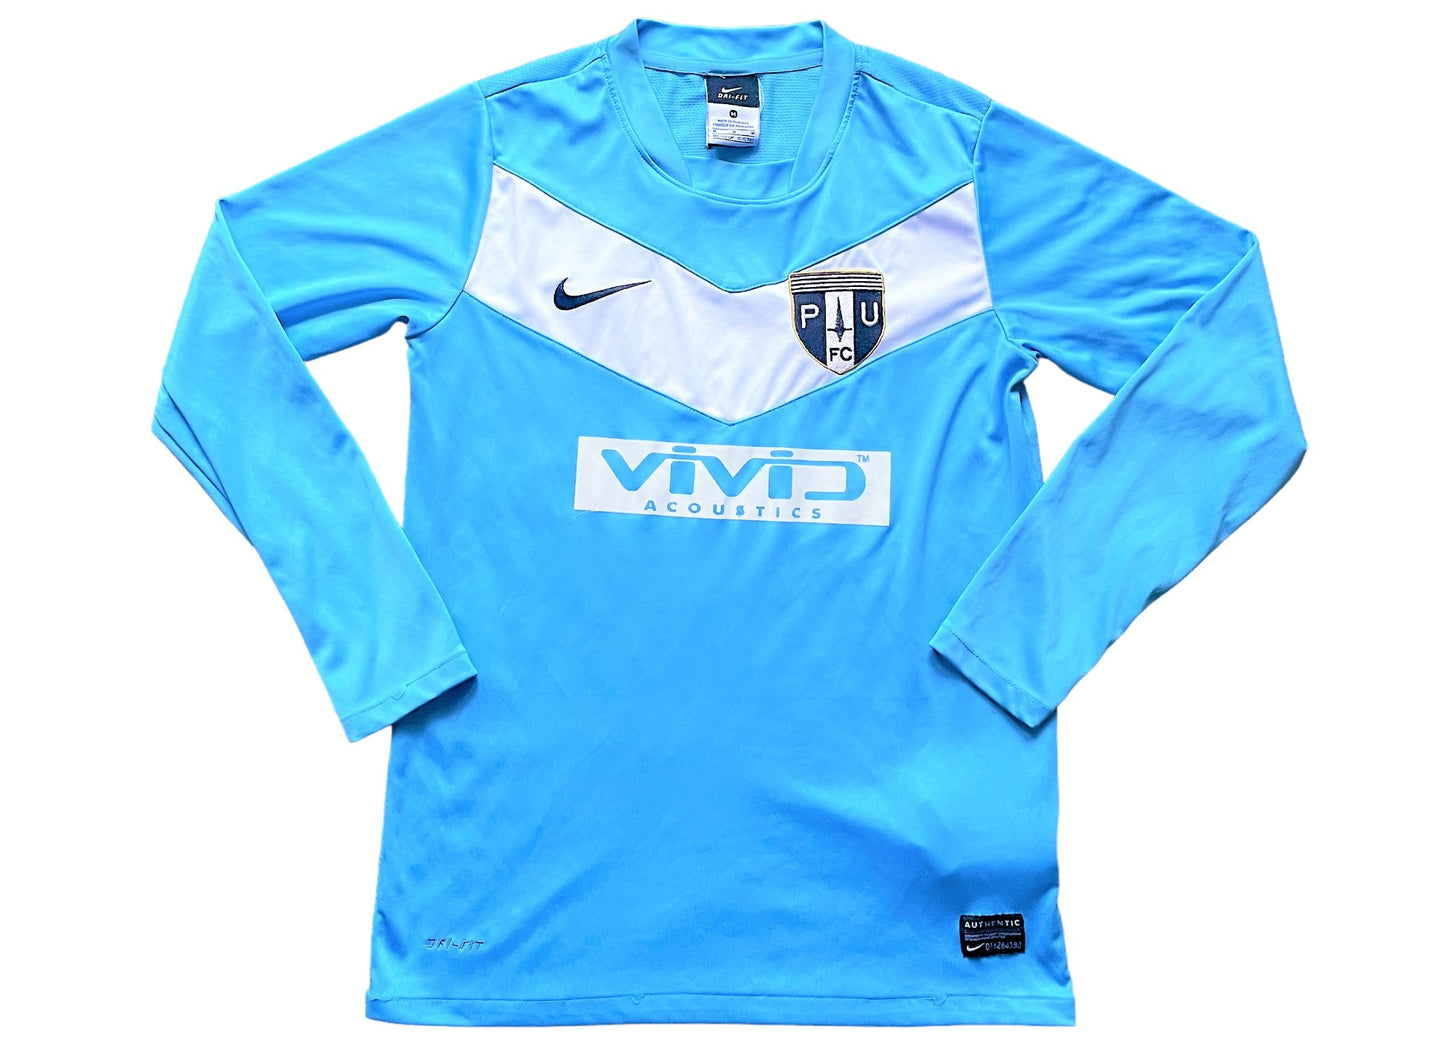 Ponteland United Shirt (excellent) Childs 10-12 years old 140-152